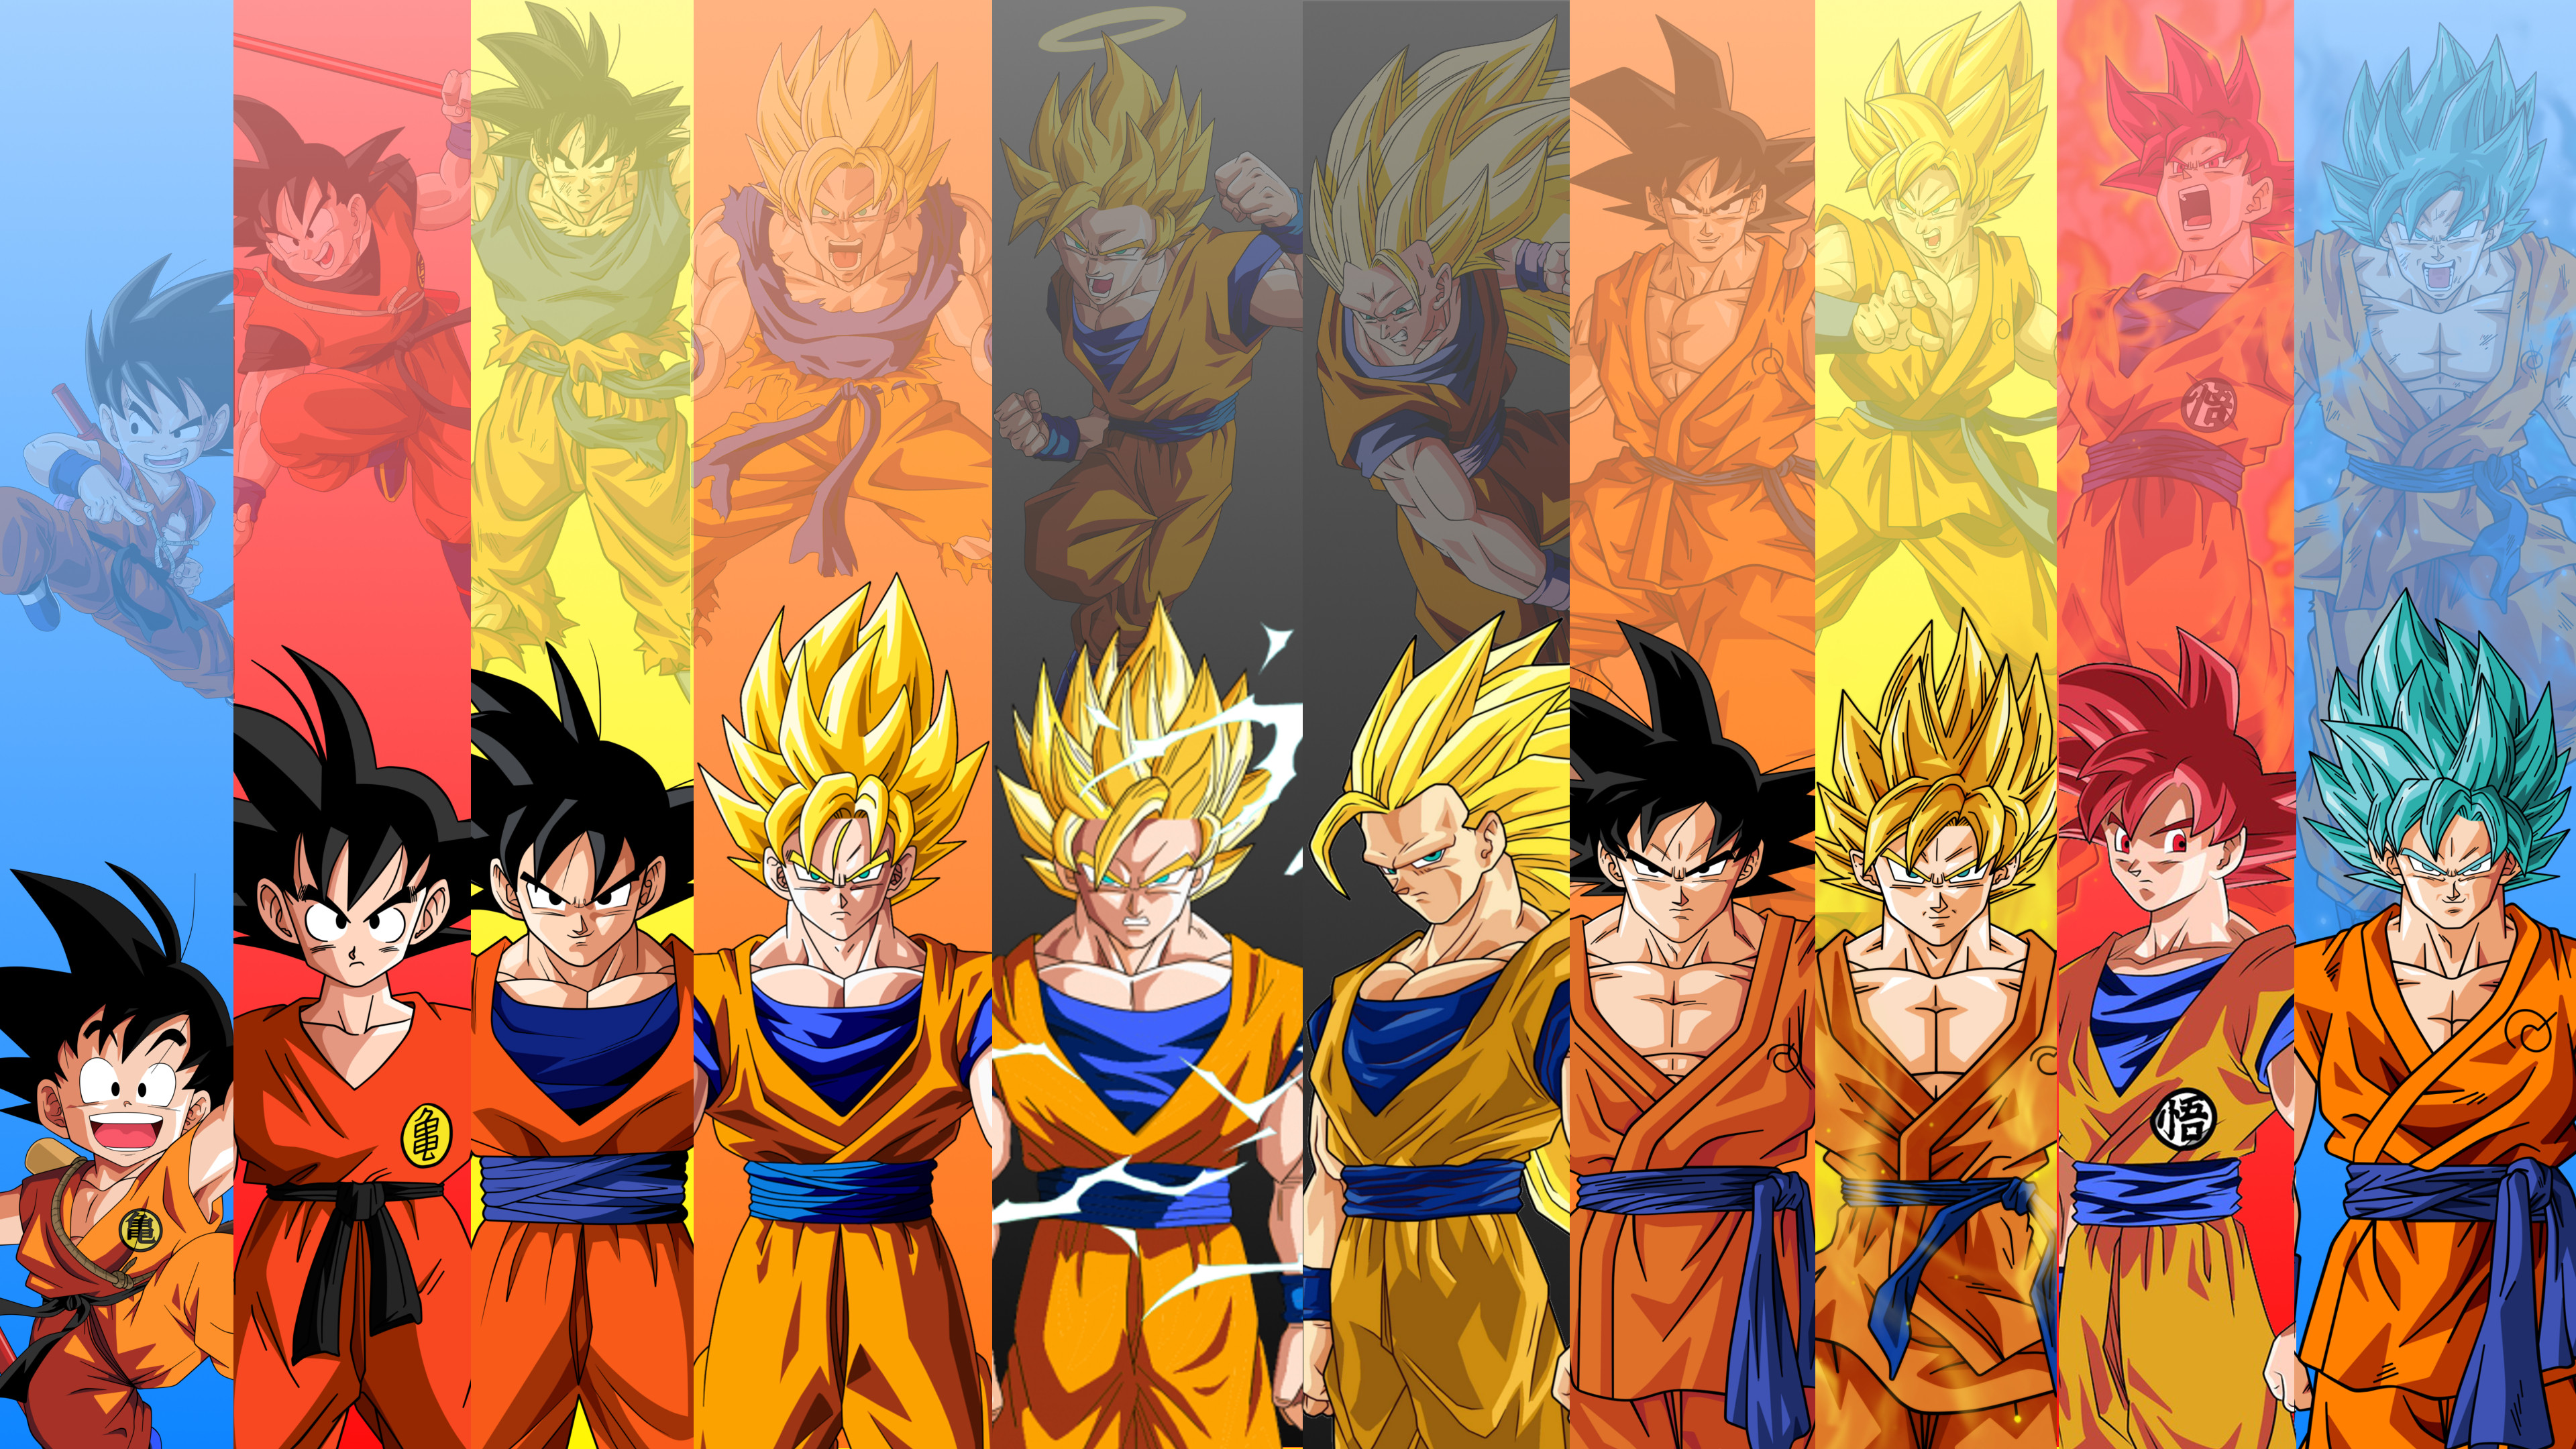 Just Made This 4k Wallpaper Featuring Forms Of Goku From Db